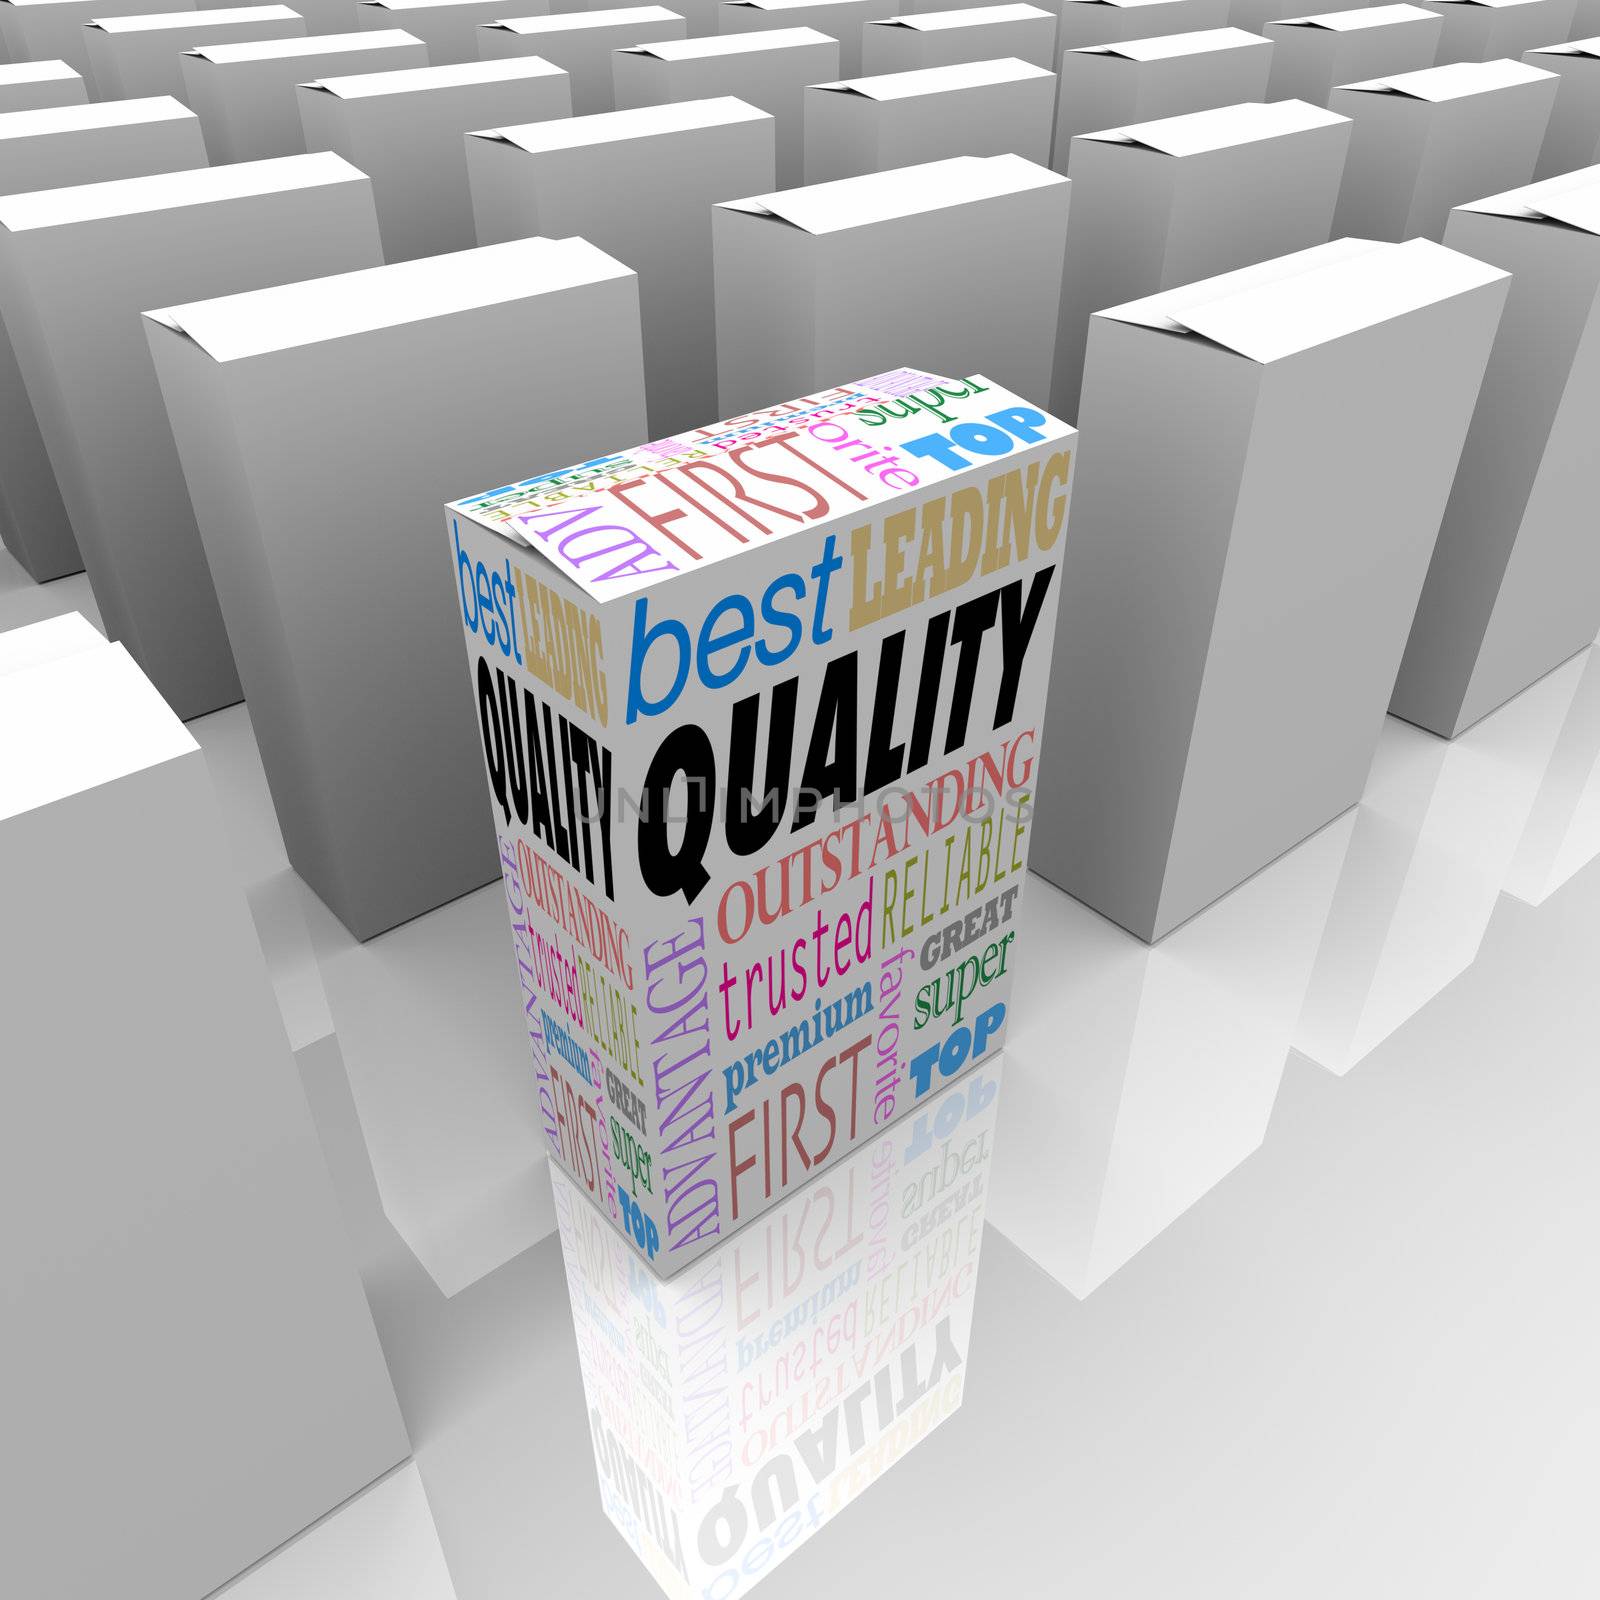 One unique box marked Quality stands out as better among many competing products, best of a crowded store shelf as the most reliable, trusted, effective and proven product